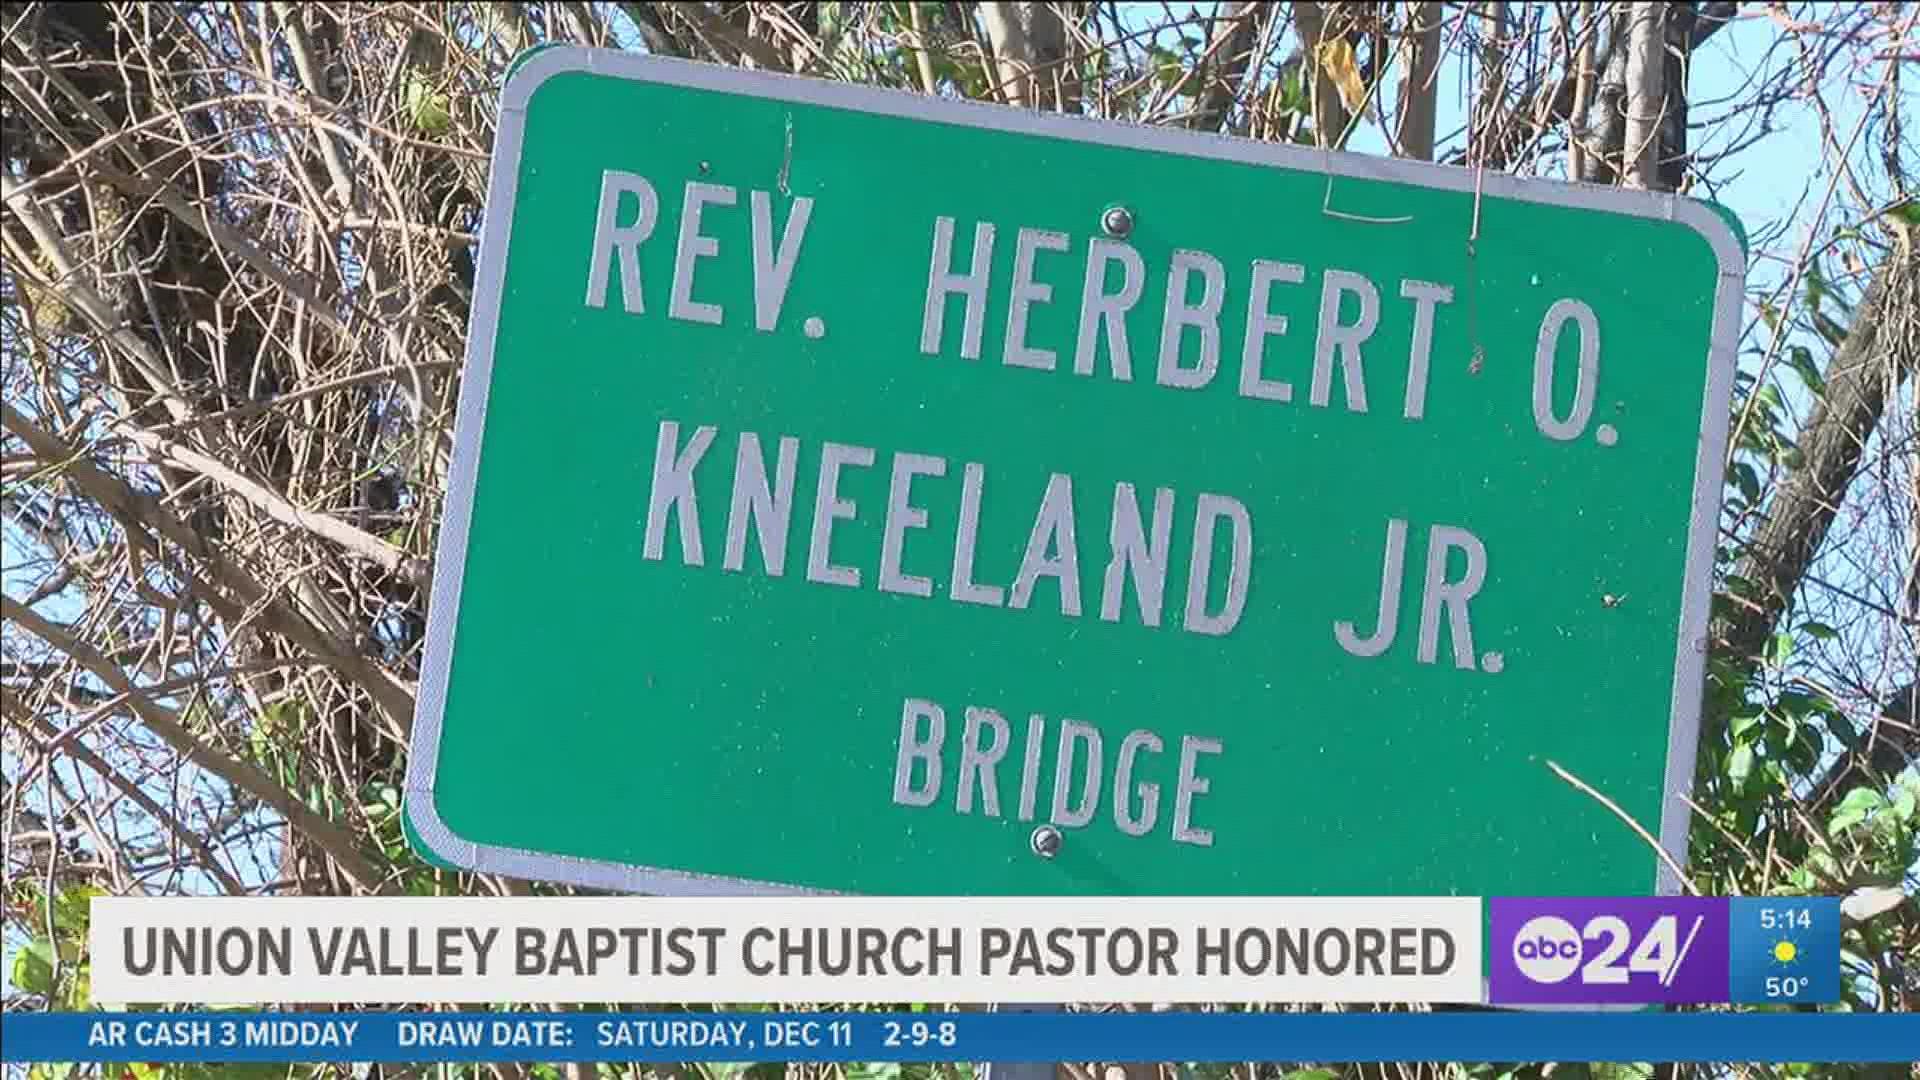 The I-240 overpass on East McLemore Avenue is now named in honor of Rev. Herbert O. Kneeland Jr., a member of the Union Valley Baptist Church.